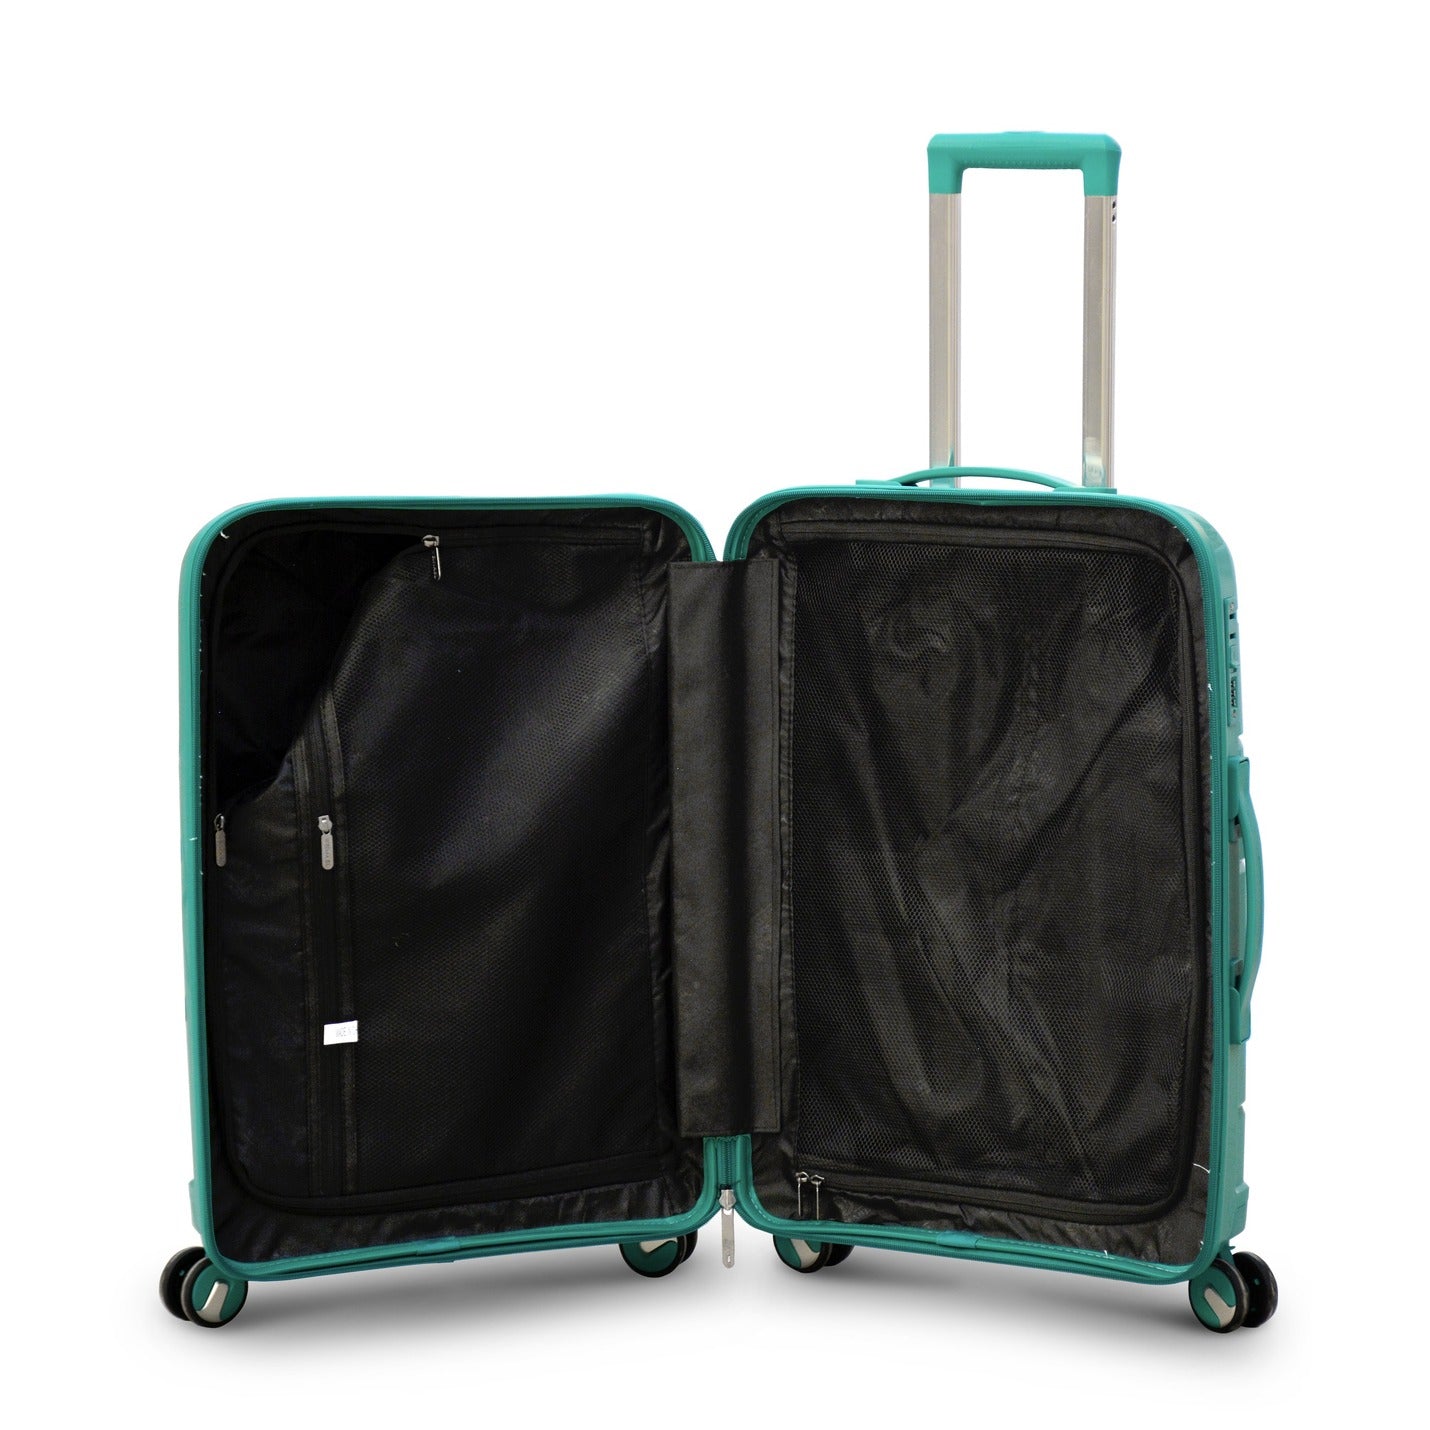 24" Dark Green Colour Ceramic Smooth PP Lightweight Luggage Bag with Double Spinner Wheel